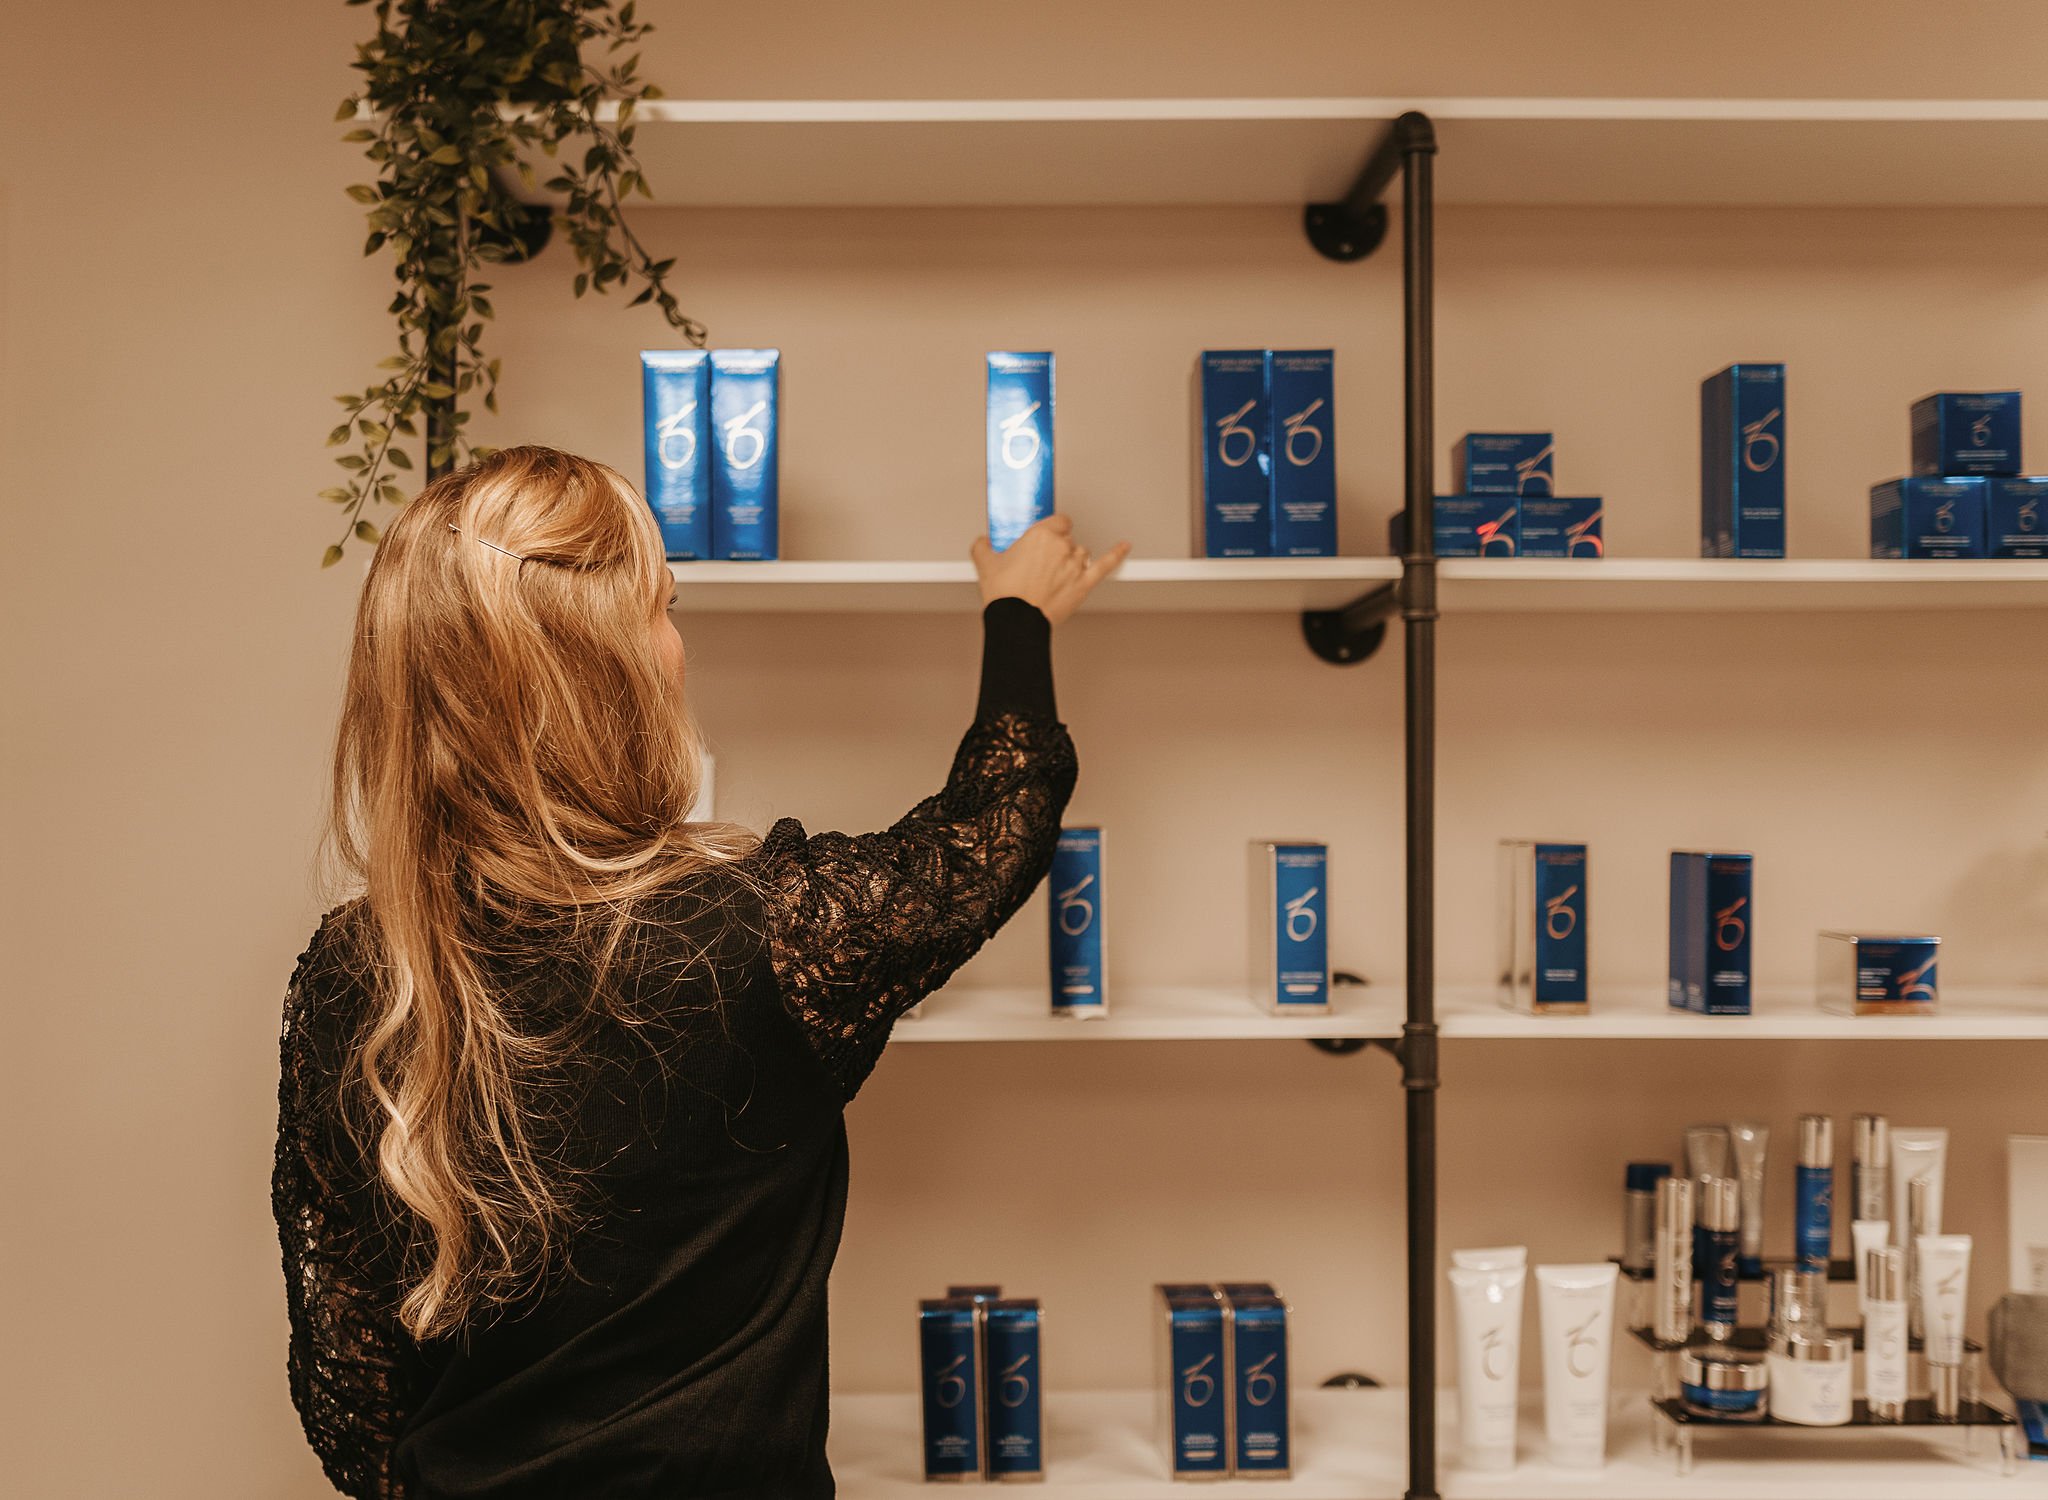 Join us in celebrating Earth Day! We're proud to feature ZO Skin Health in our office, as they are committed to achieving complete sustainability by the end of 2025!

In fact, the ZO cleansers now feature a recyclable tube made with 50% post-consumer